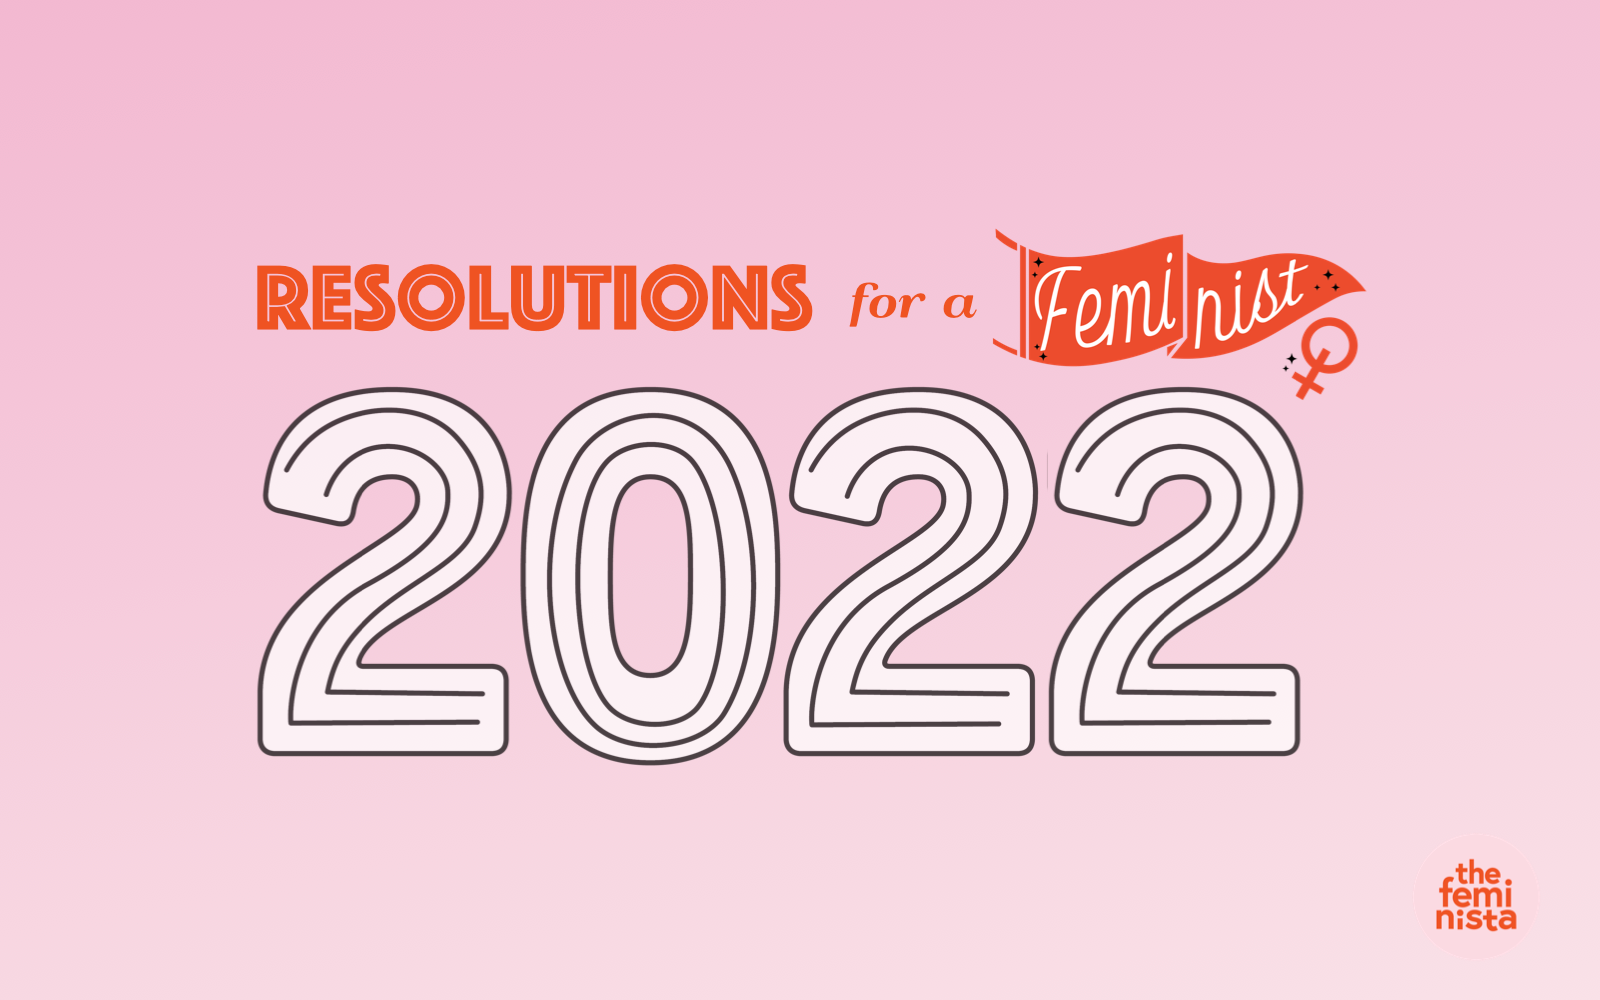 "Resolutions for a Feminist 2022" on a pink background with The Feminista logo